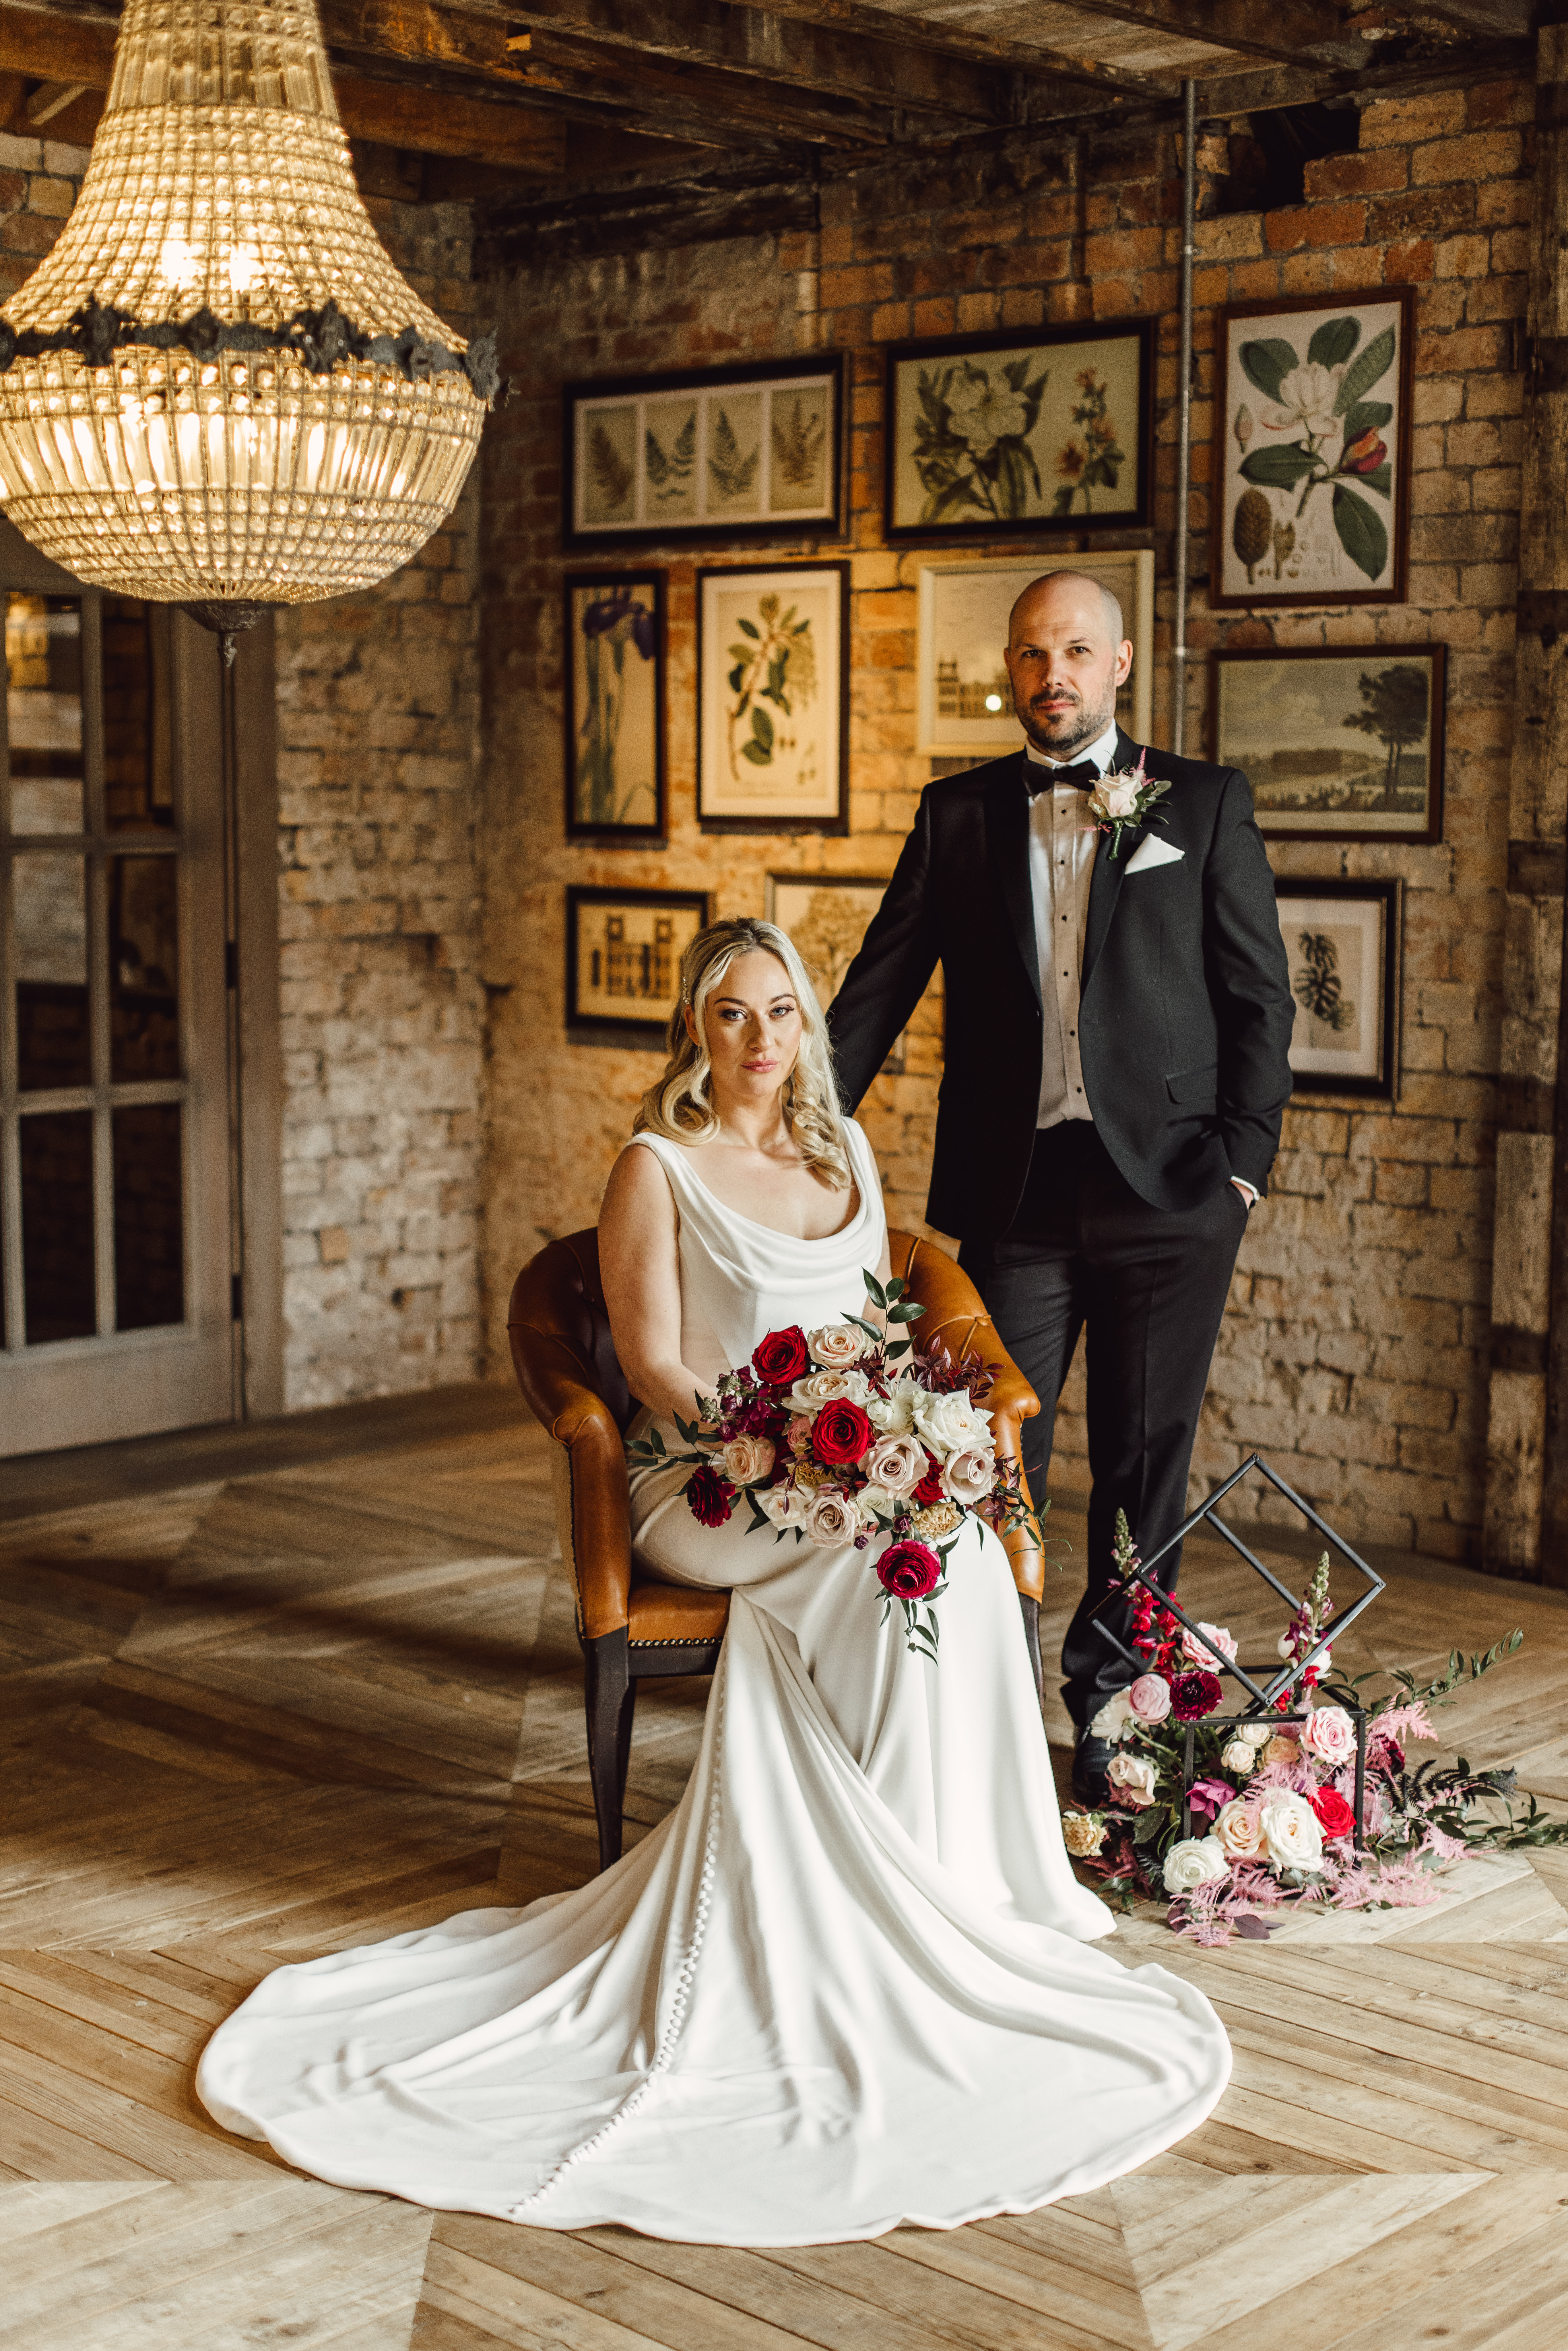 Rooftop drinks, rustic-luxe charm and romance – Tour this new Northumberland wedding venue